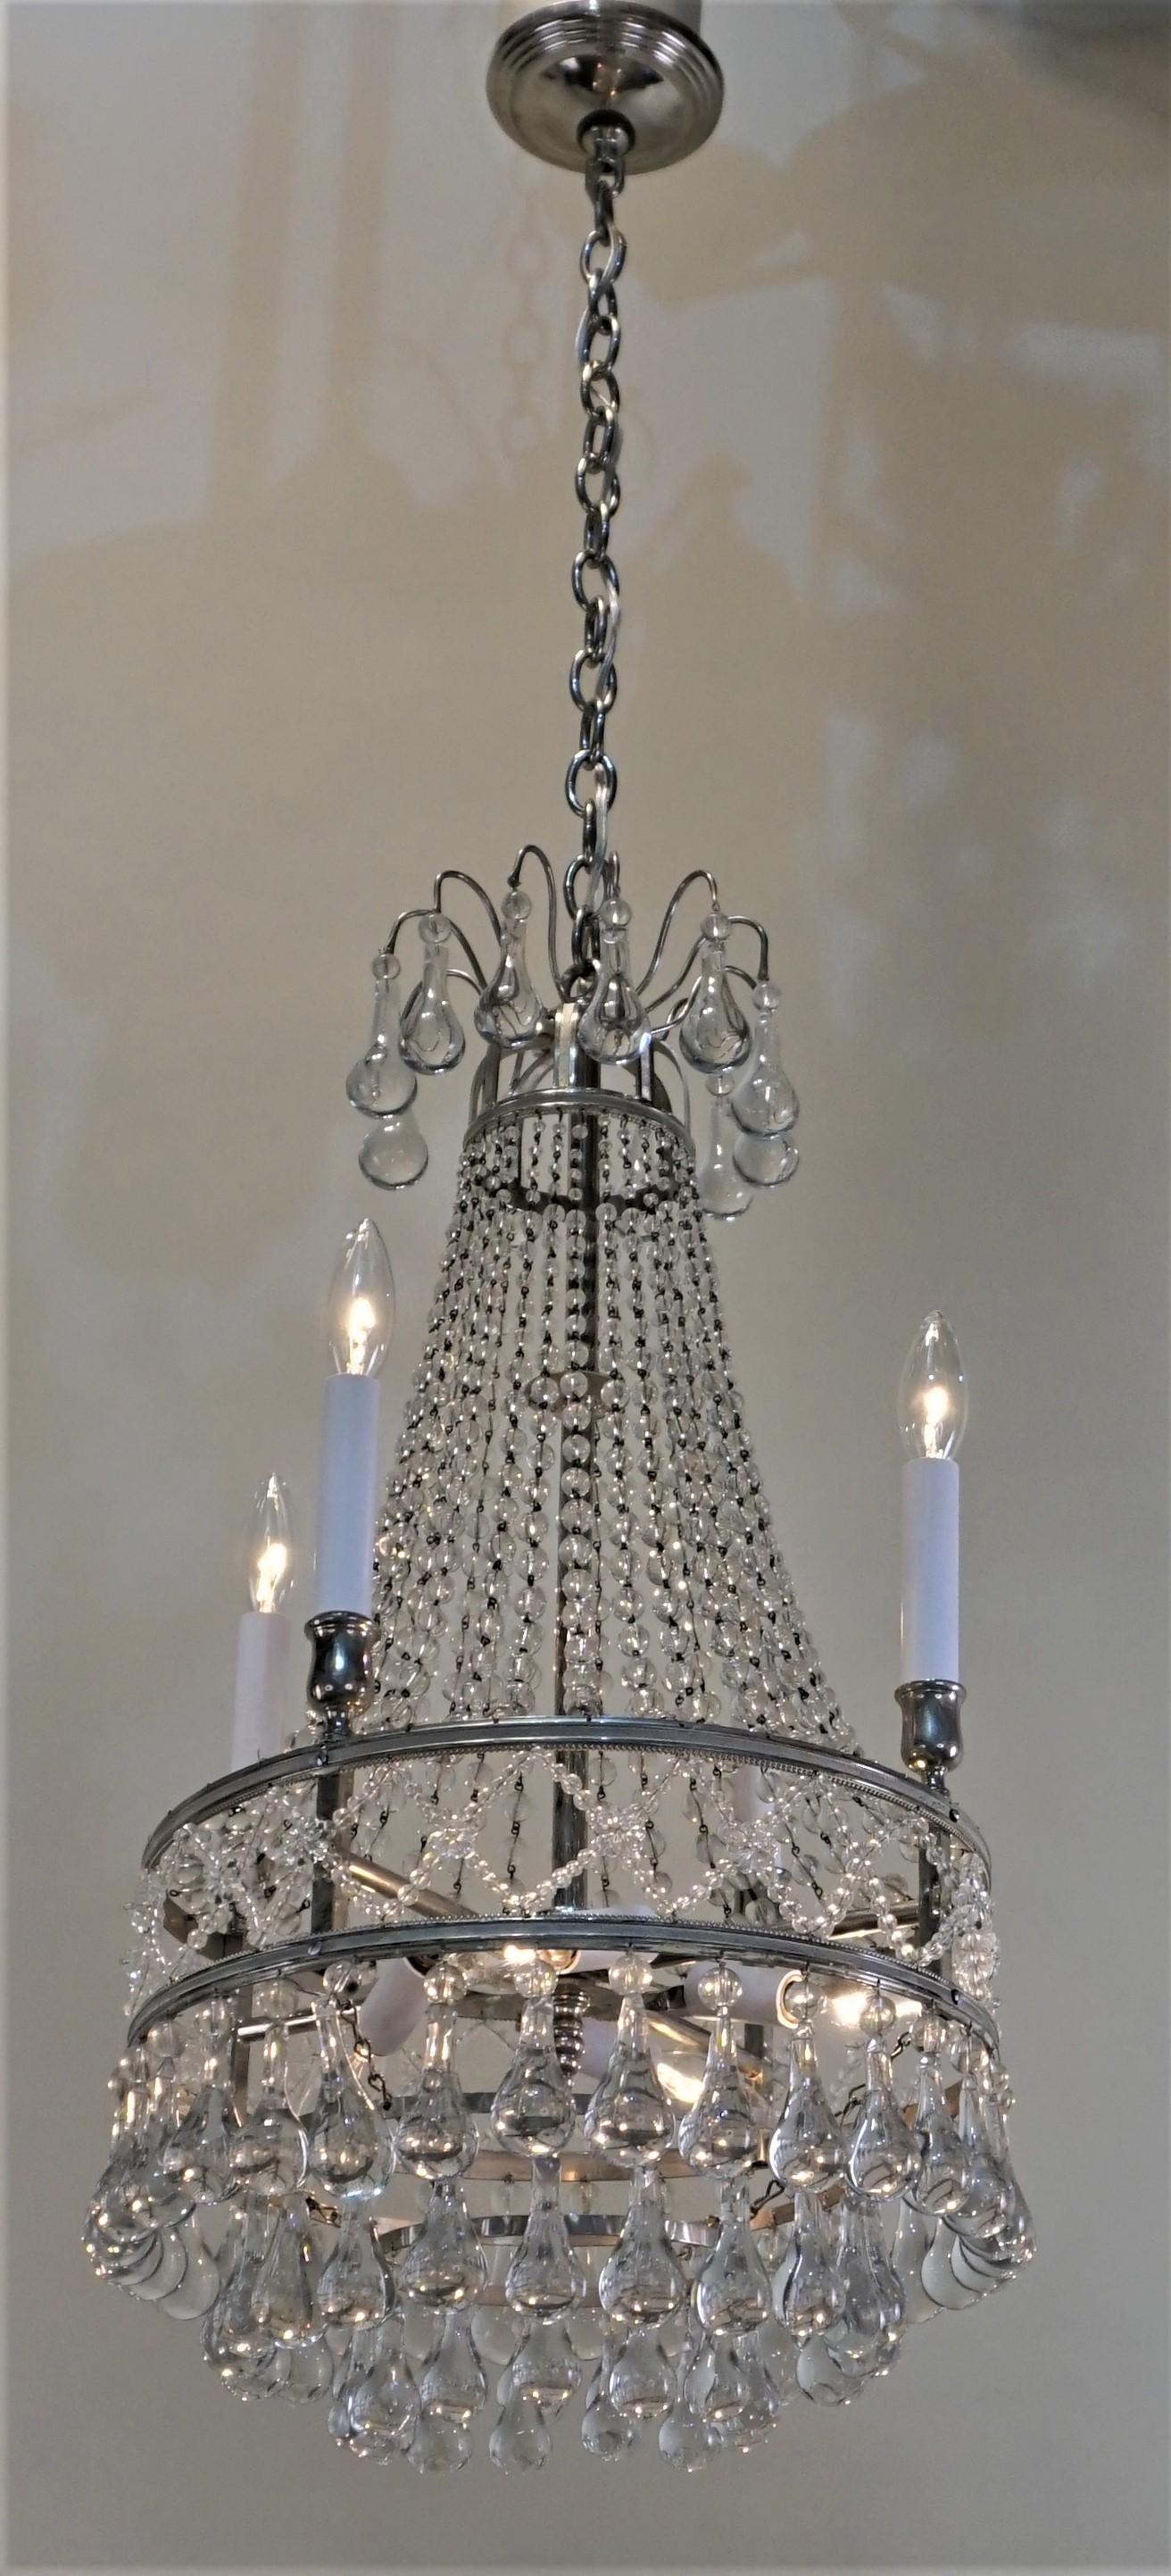 1930s Art Deco chandelier. This beautiful chandelier is crafted in France has graduated fasted crystal chain and large rain drop crystal with nickel on bronze frame.
Total of eight lights 60 watt max each.
Height can be adjusted by removing some